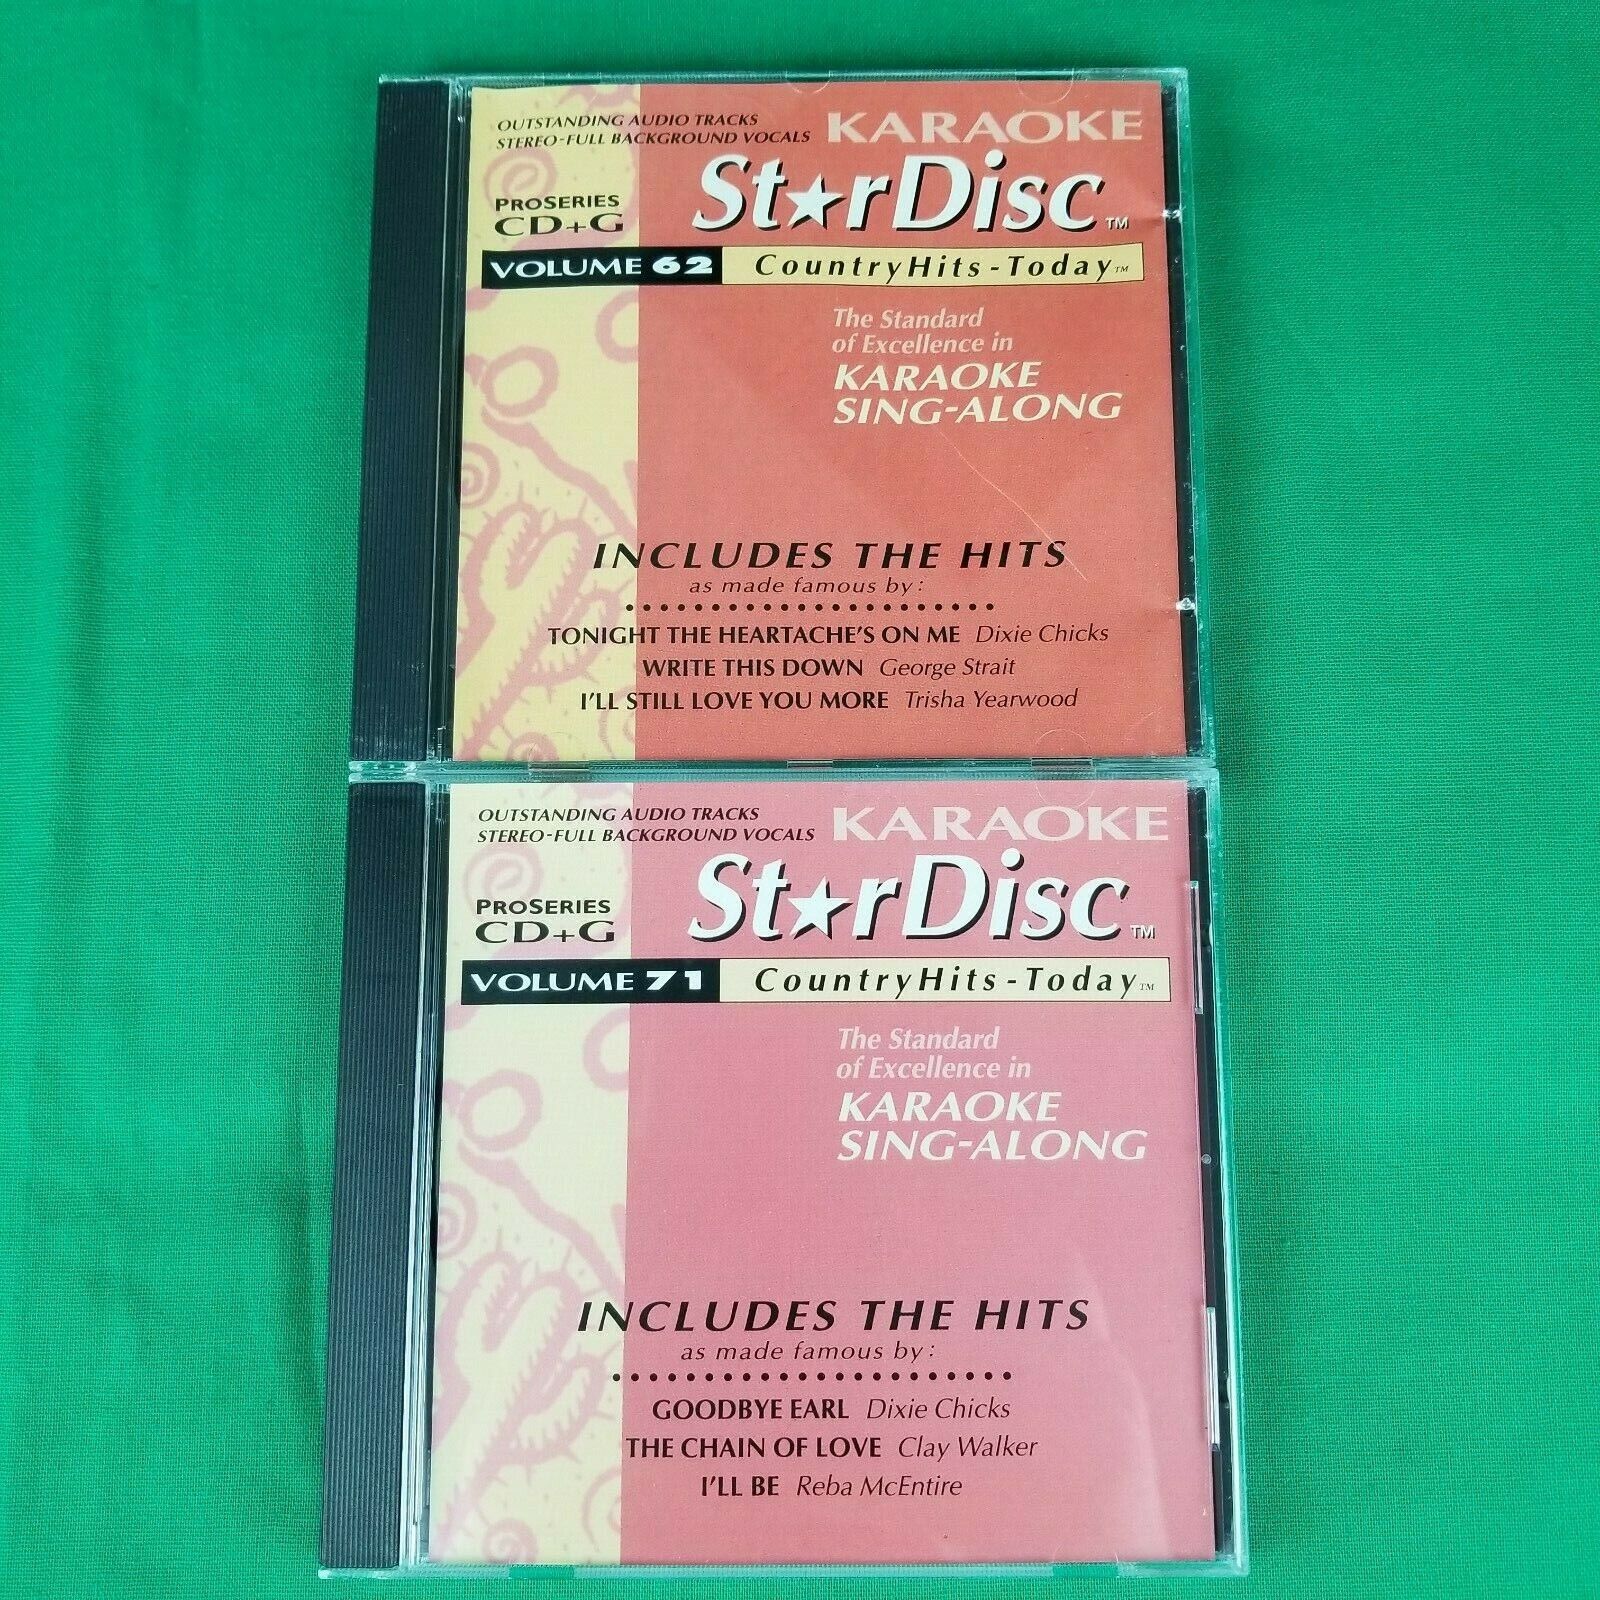 Pre-Owned Lot of 2 StarDisc Karaoke Country Classics CD+G Volume 62 & 71 Star Disc